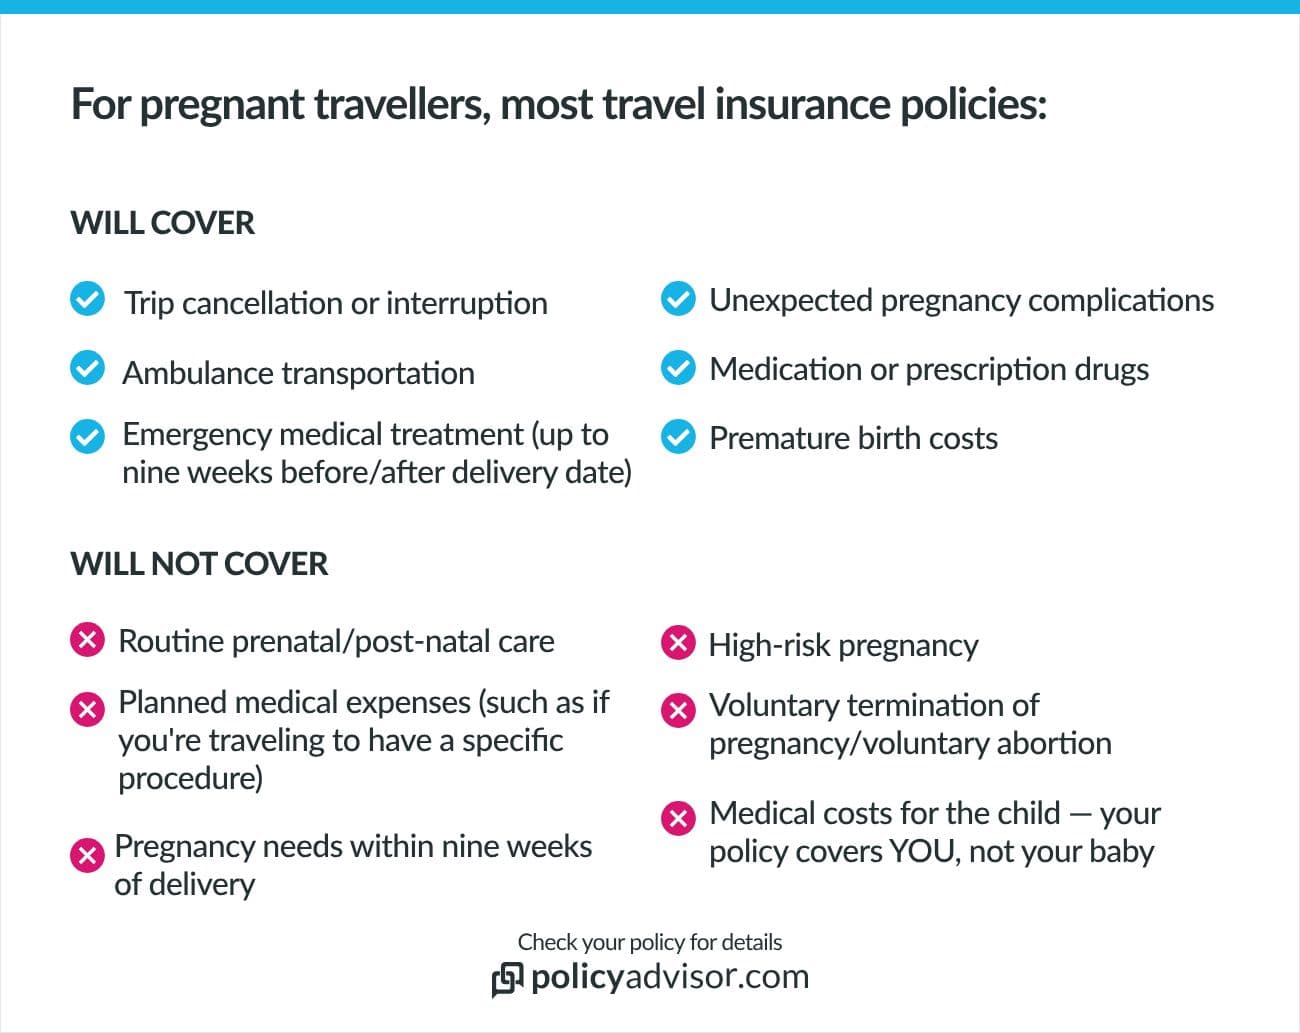 Why Buy Visitors Insurance When Pregnancy or Childbirth is Not Covered?